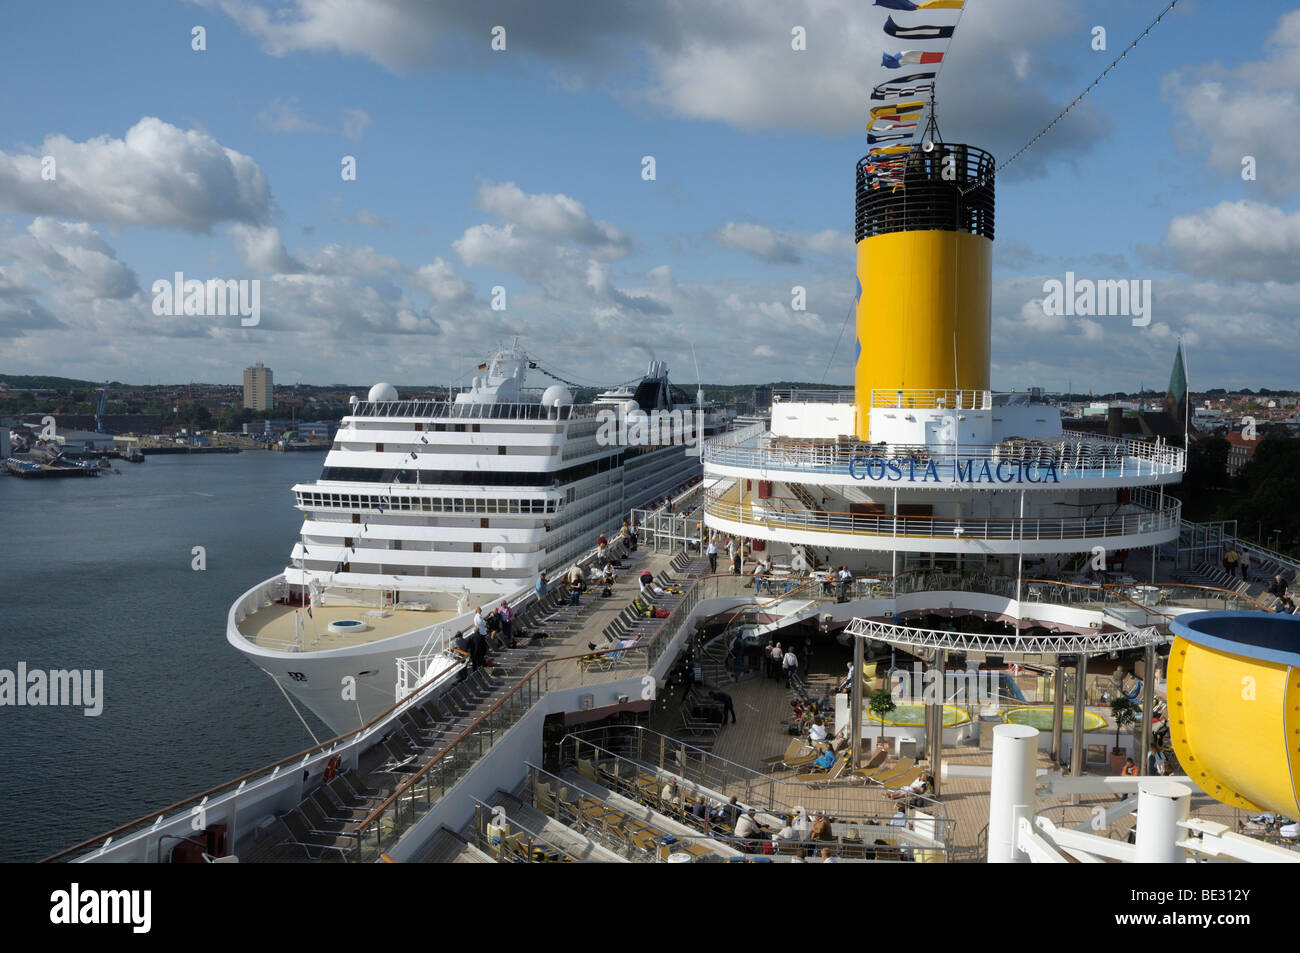 Costa Magica cruise ship in the port of Kiel, Schleswig-Holstein, Germany, Europe Stock Photo